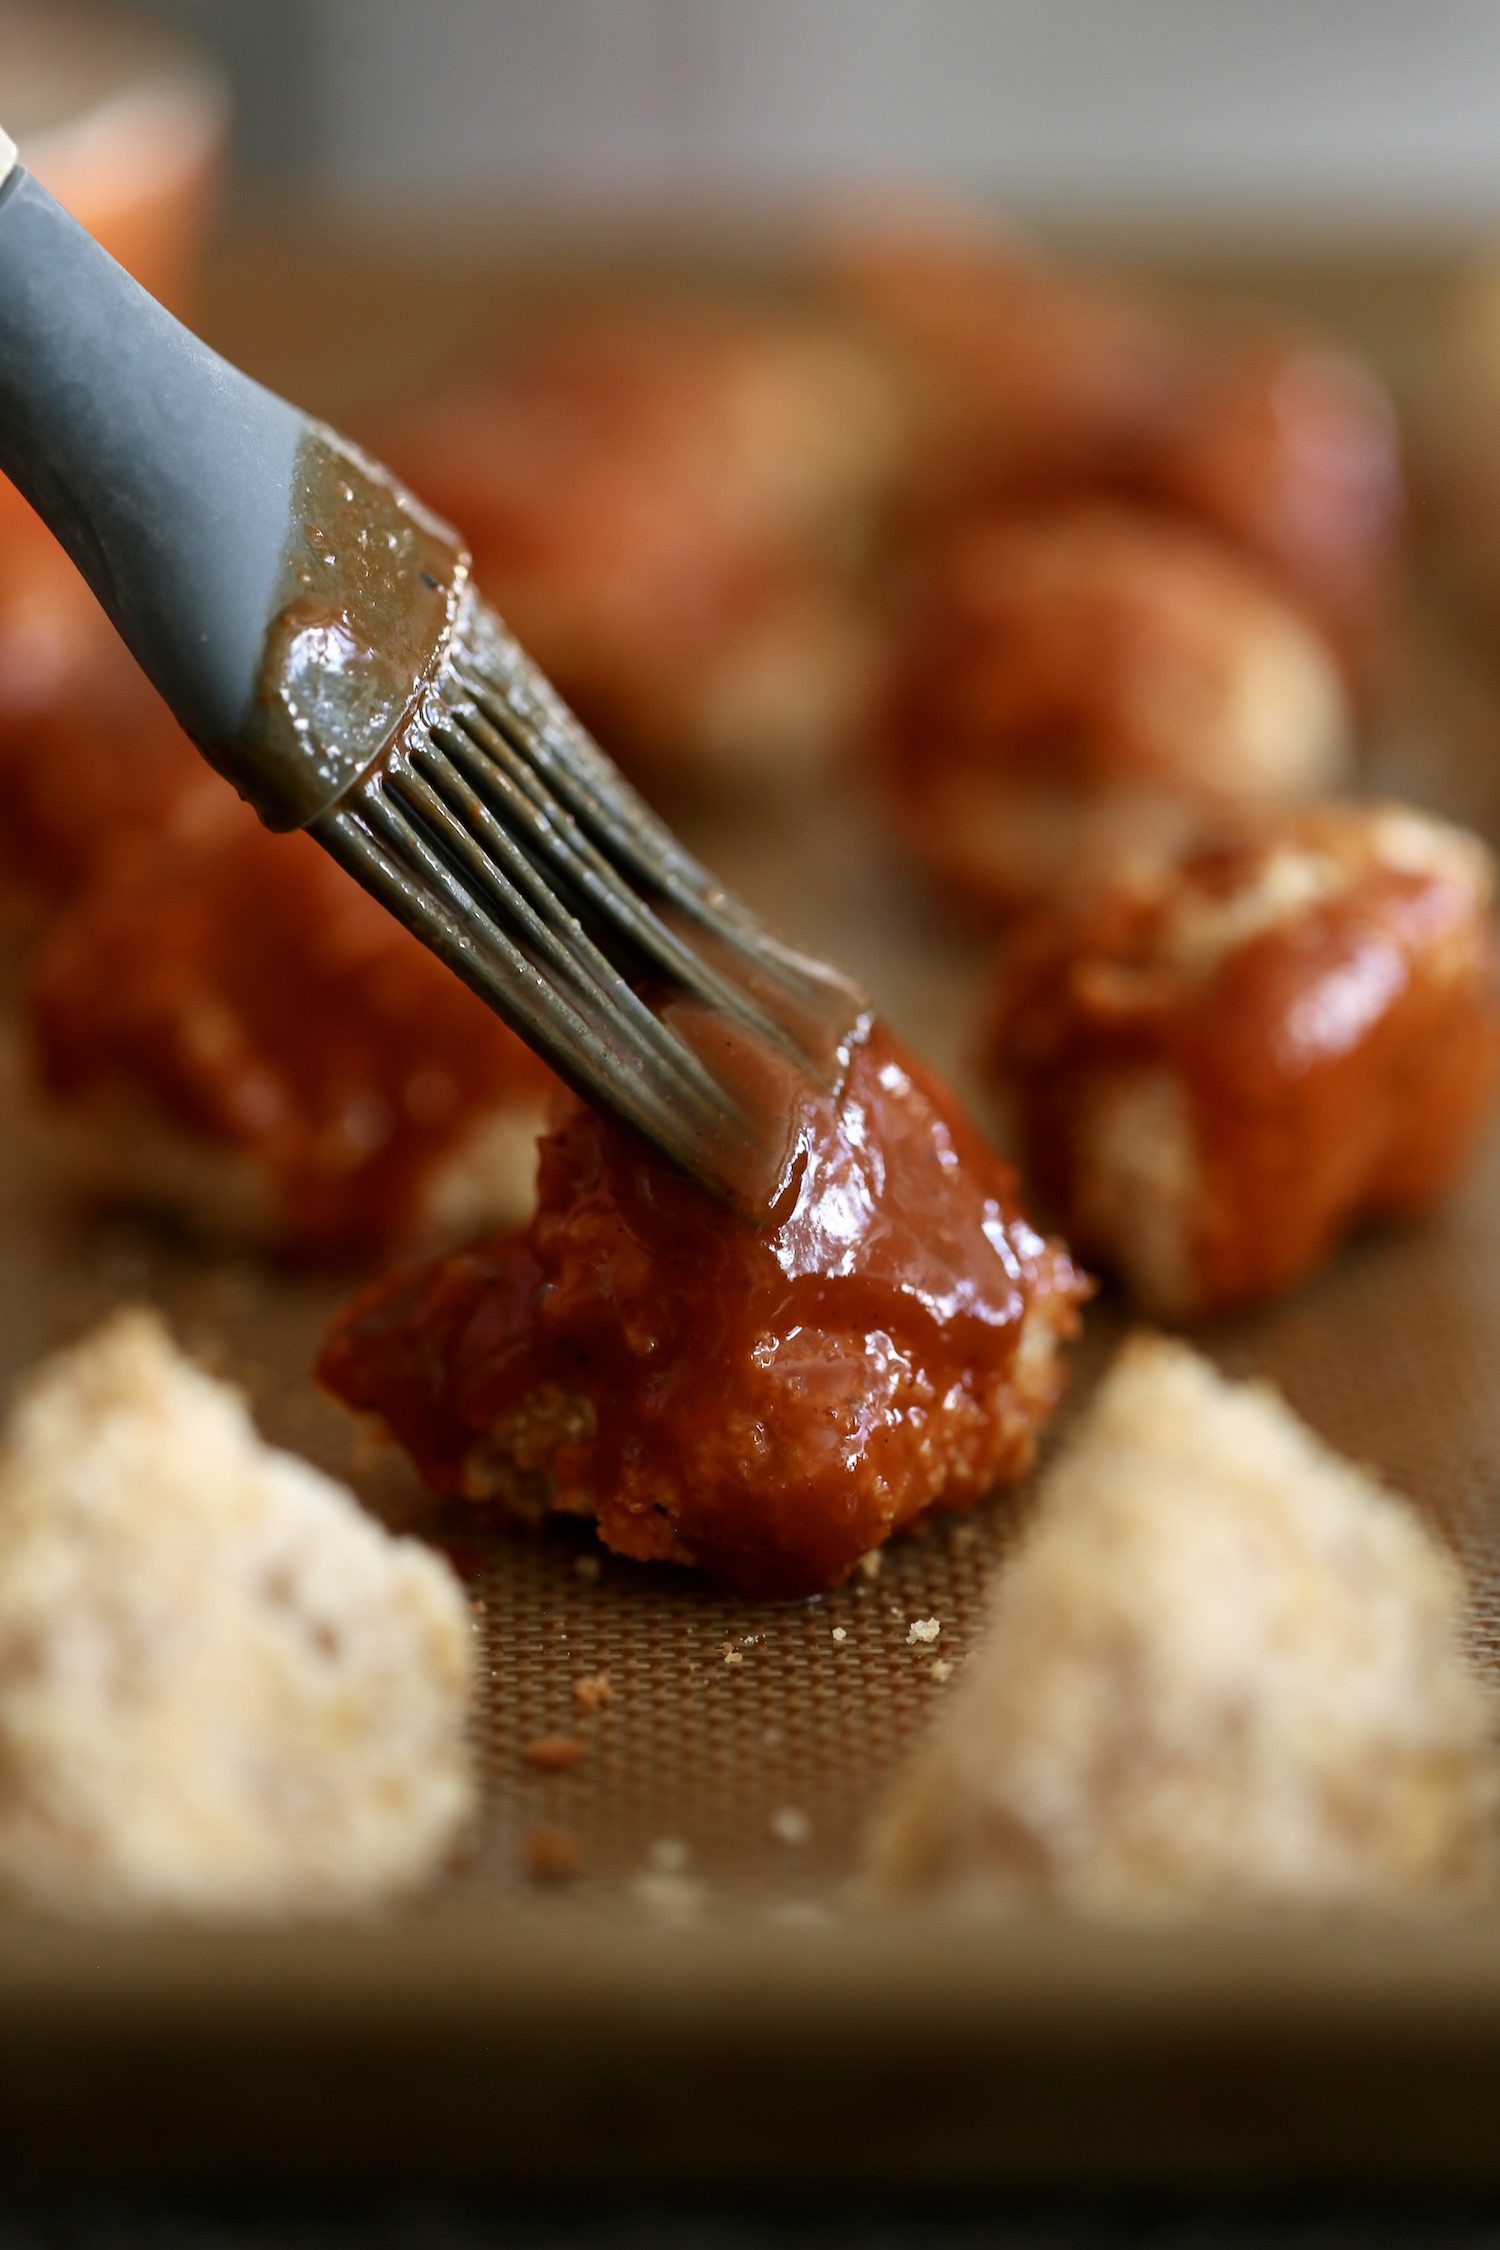 bbq sauce being slathered on a baked cauliflower wing